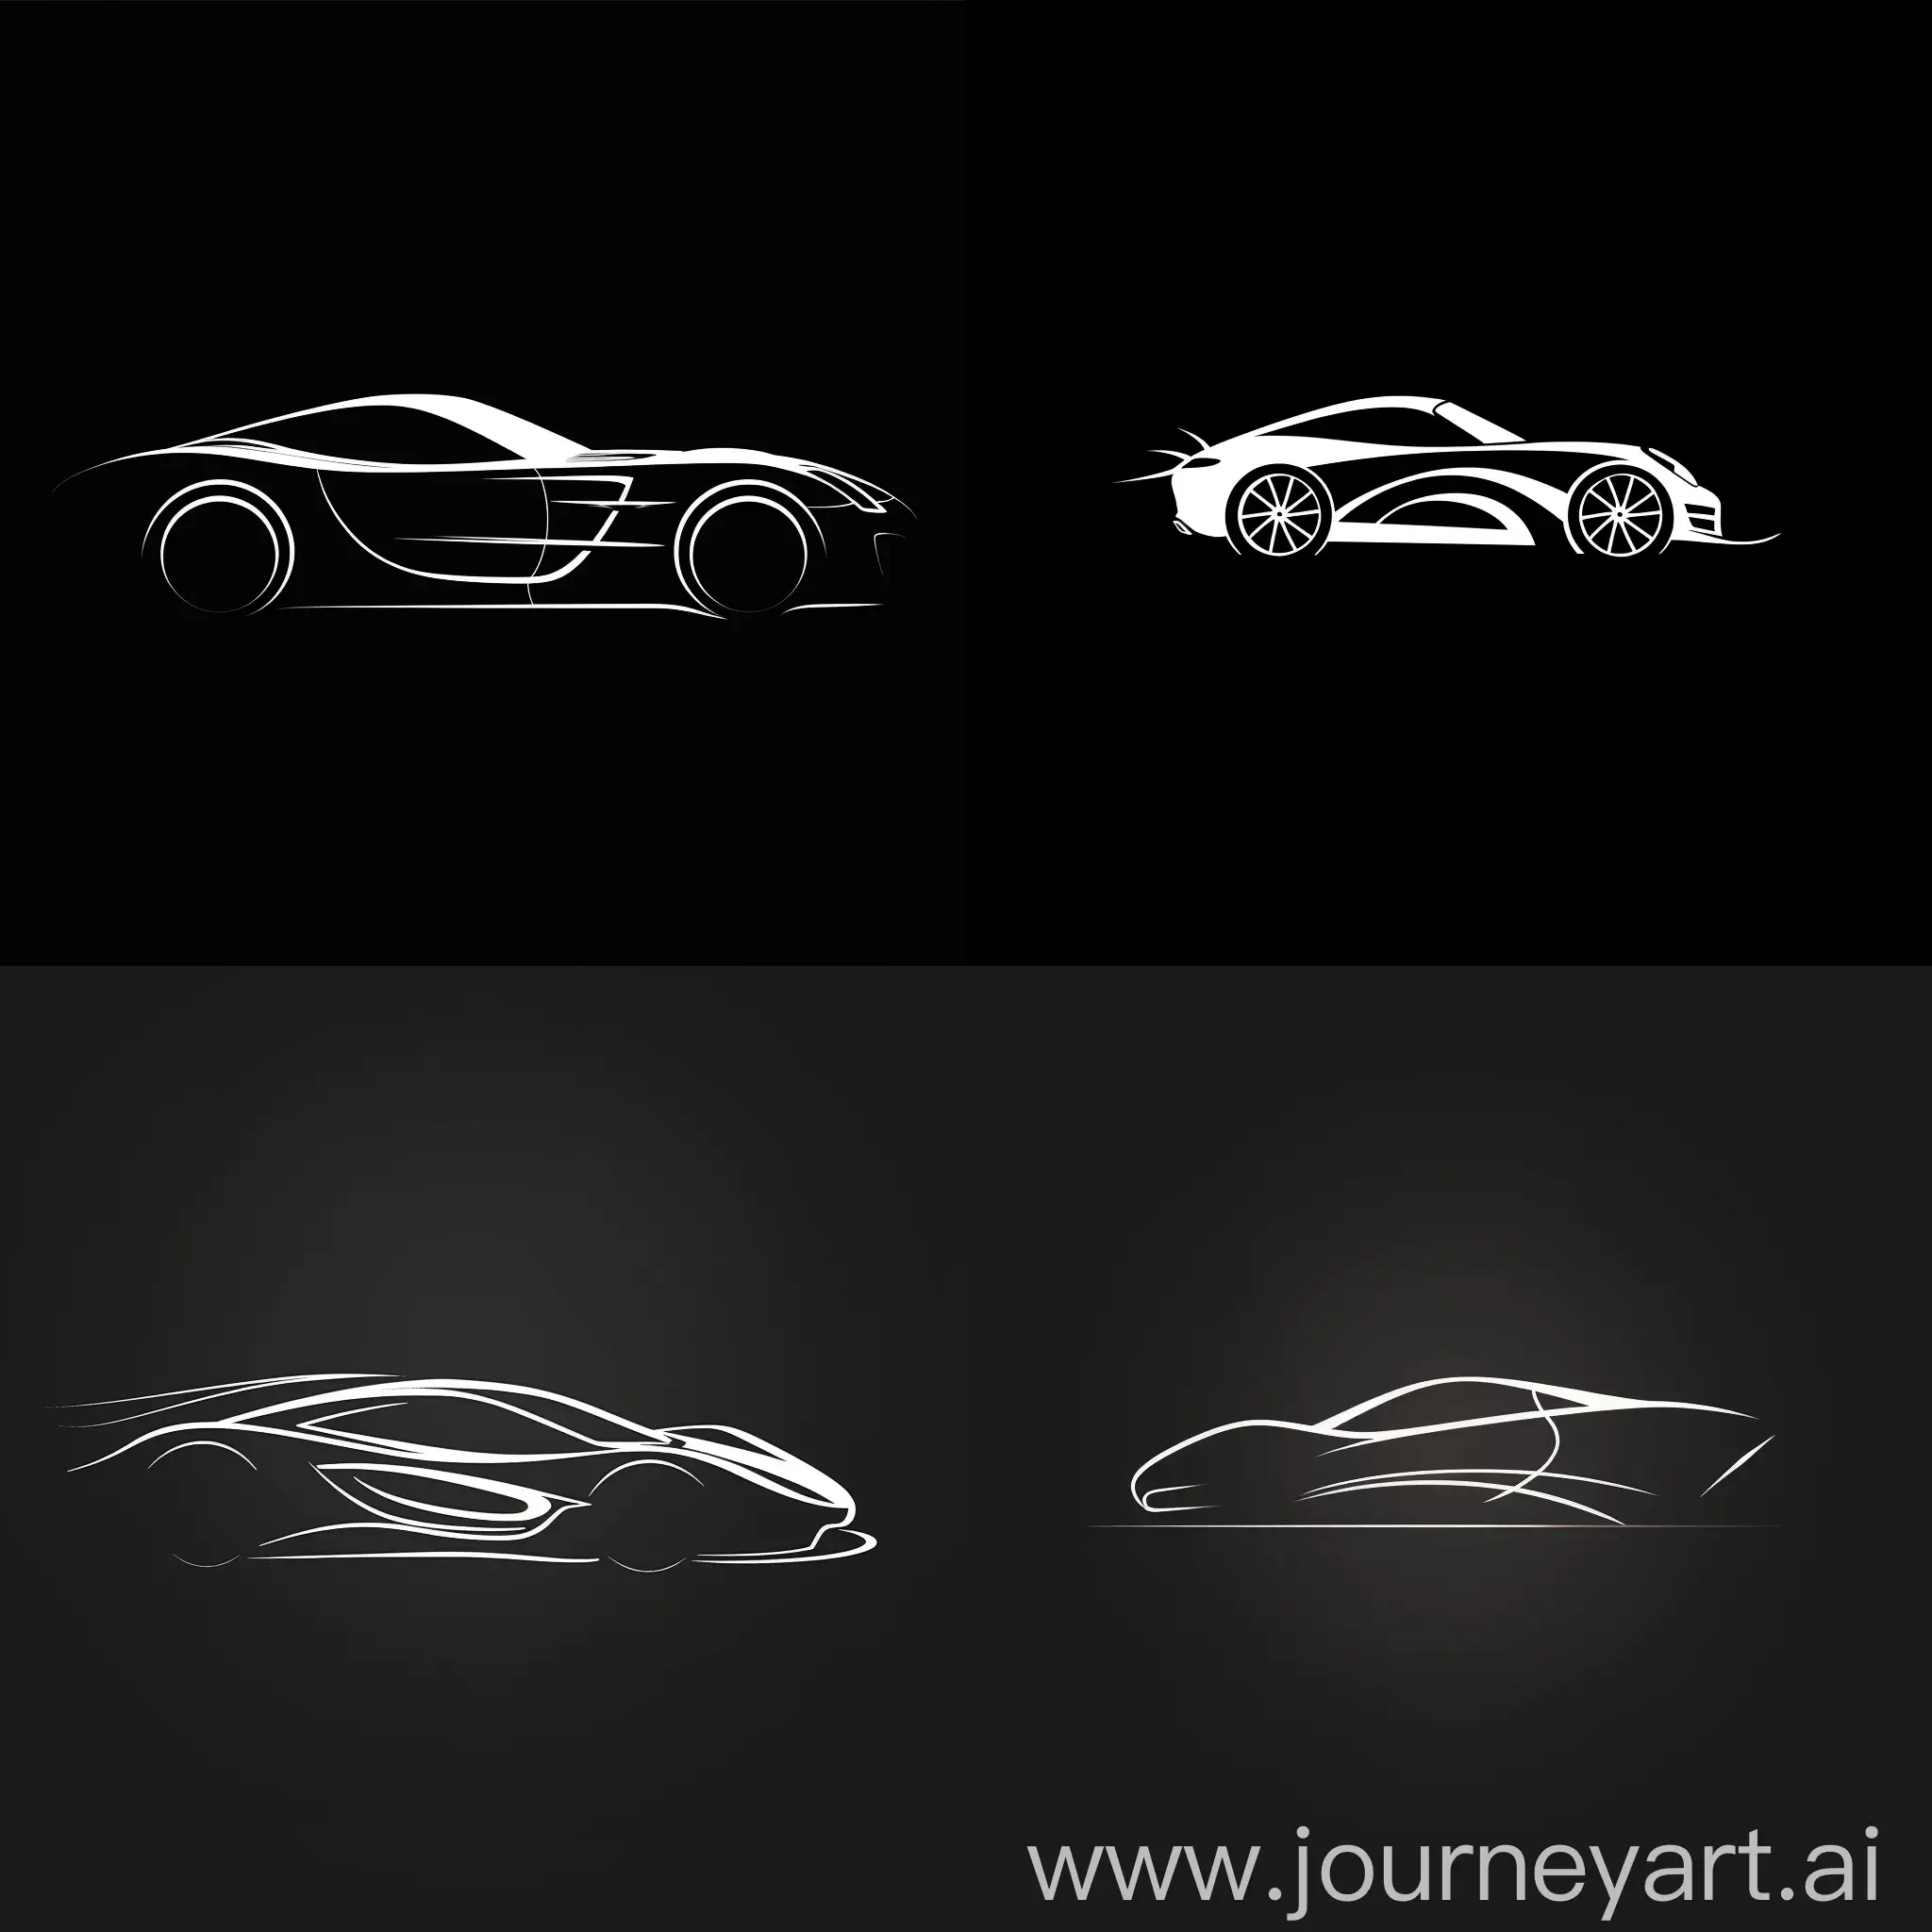 create a logo about car , some curves silhouette of a car, no fill and bodywork , no colors , minimalist, simple art